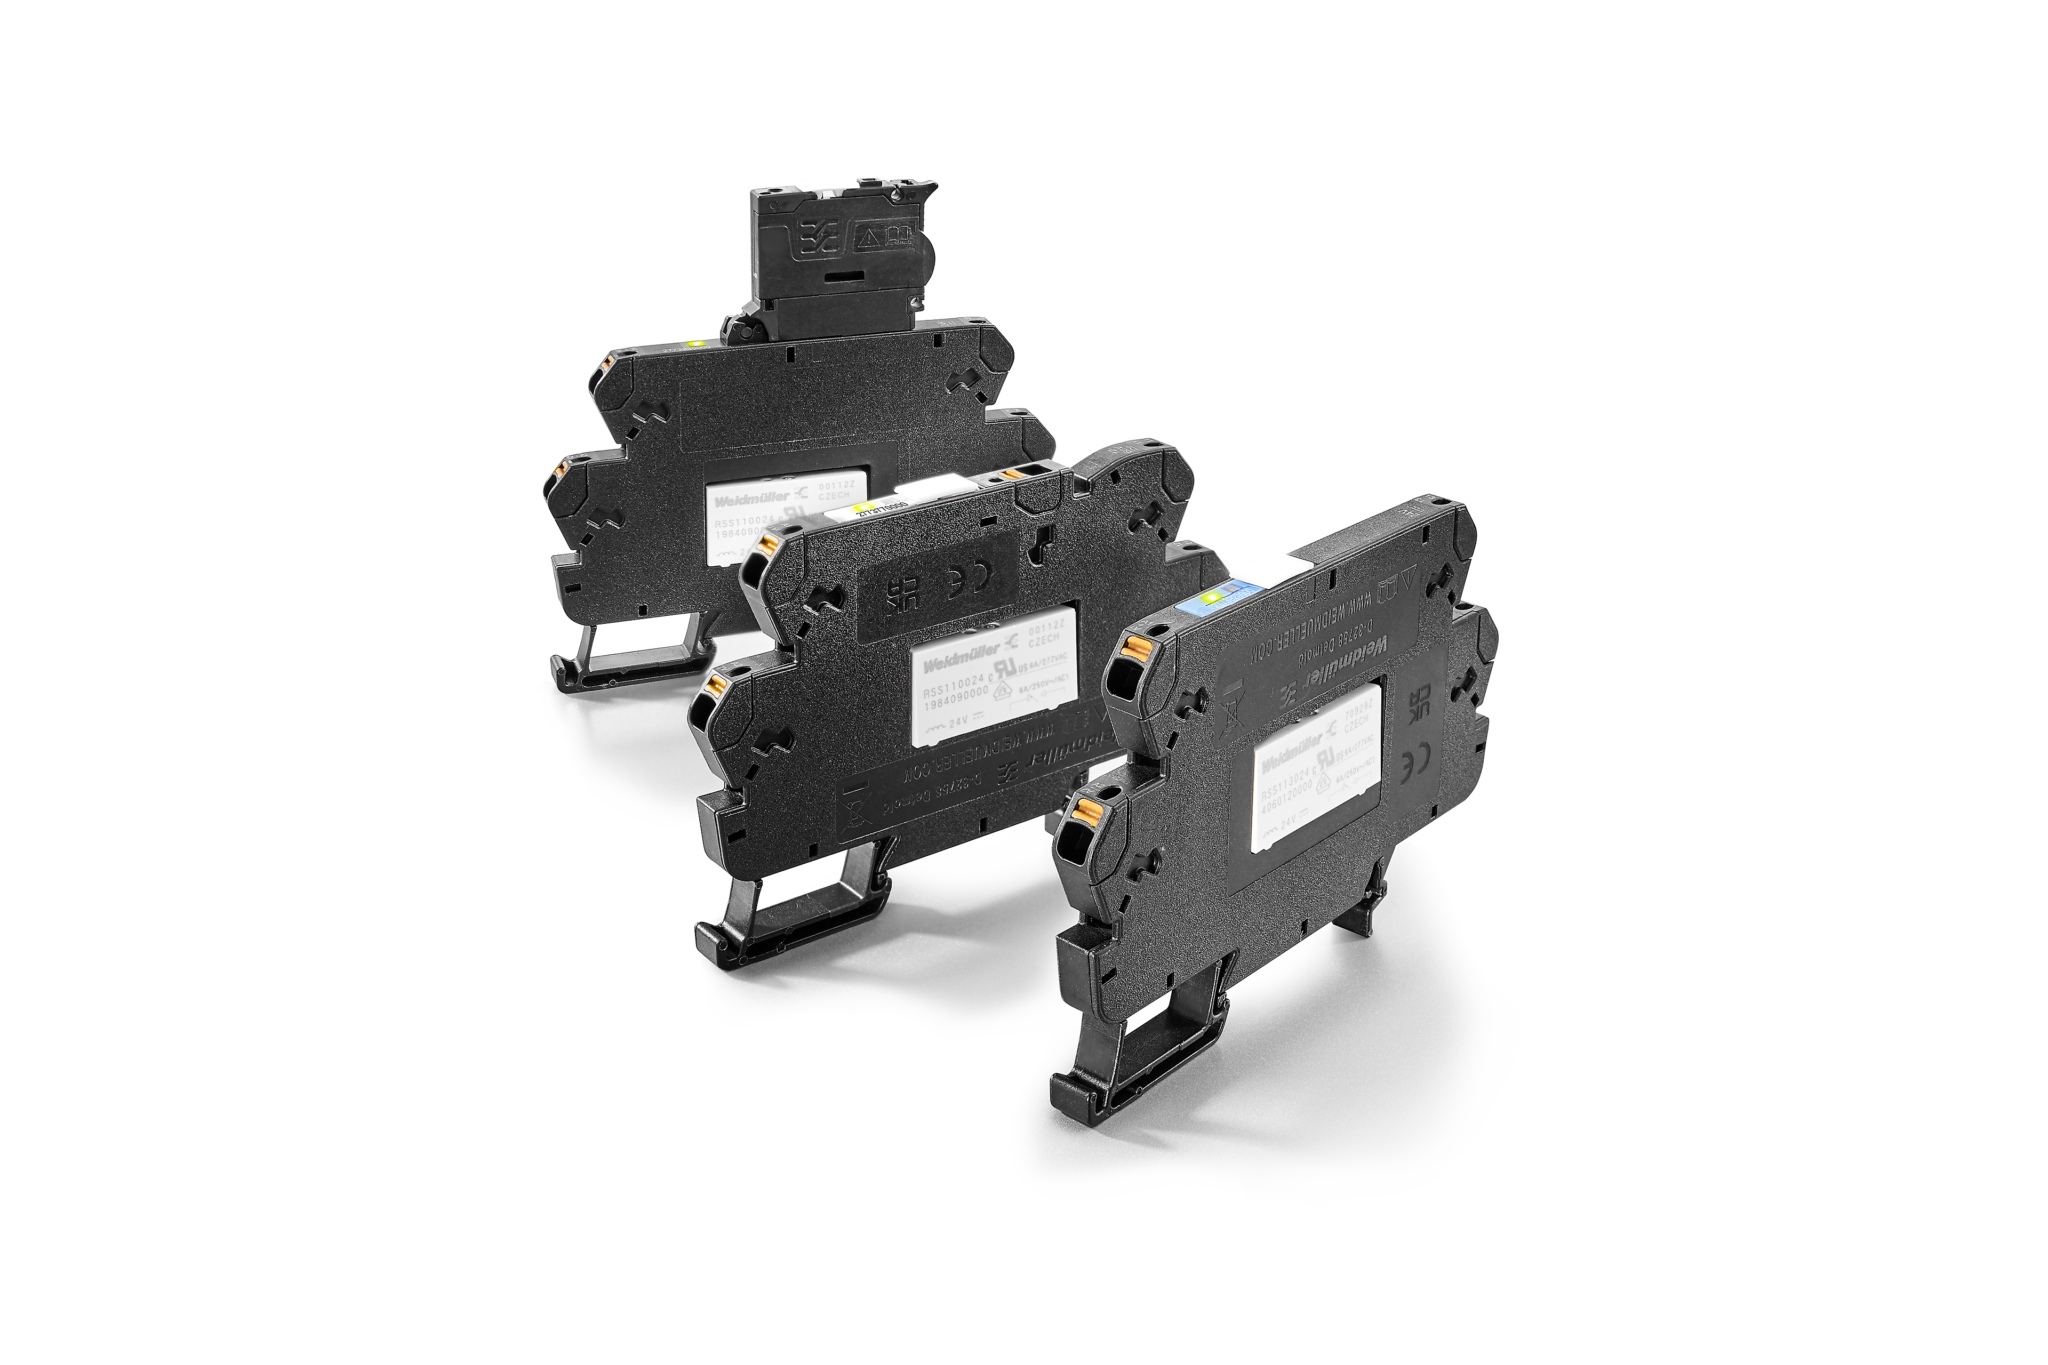 Weidmuller USA’s TERMSERIES-COMPACT modules